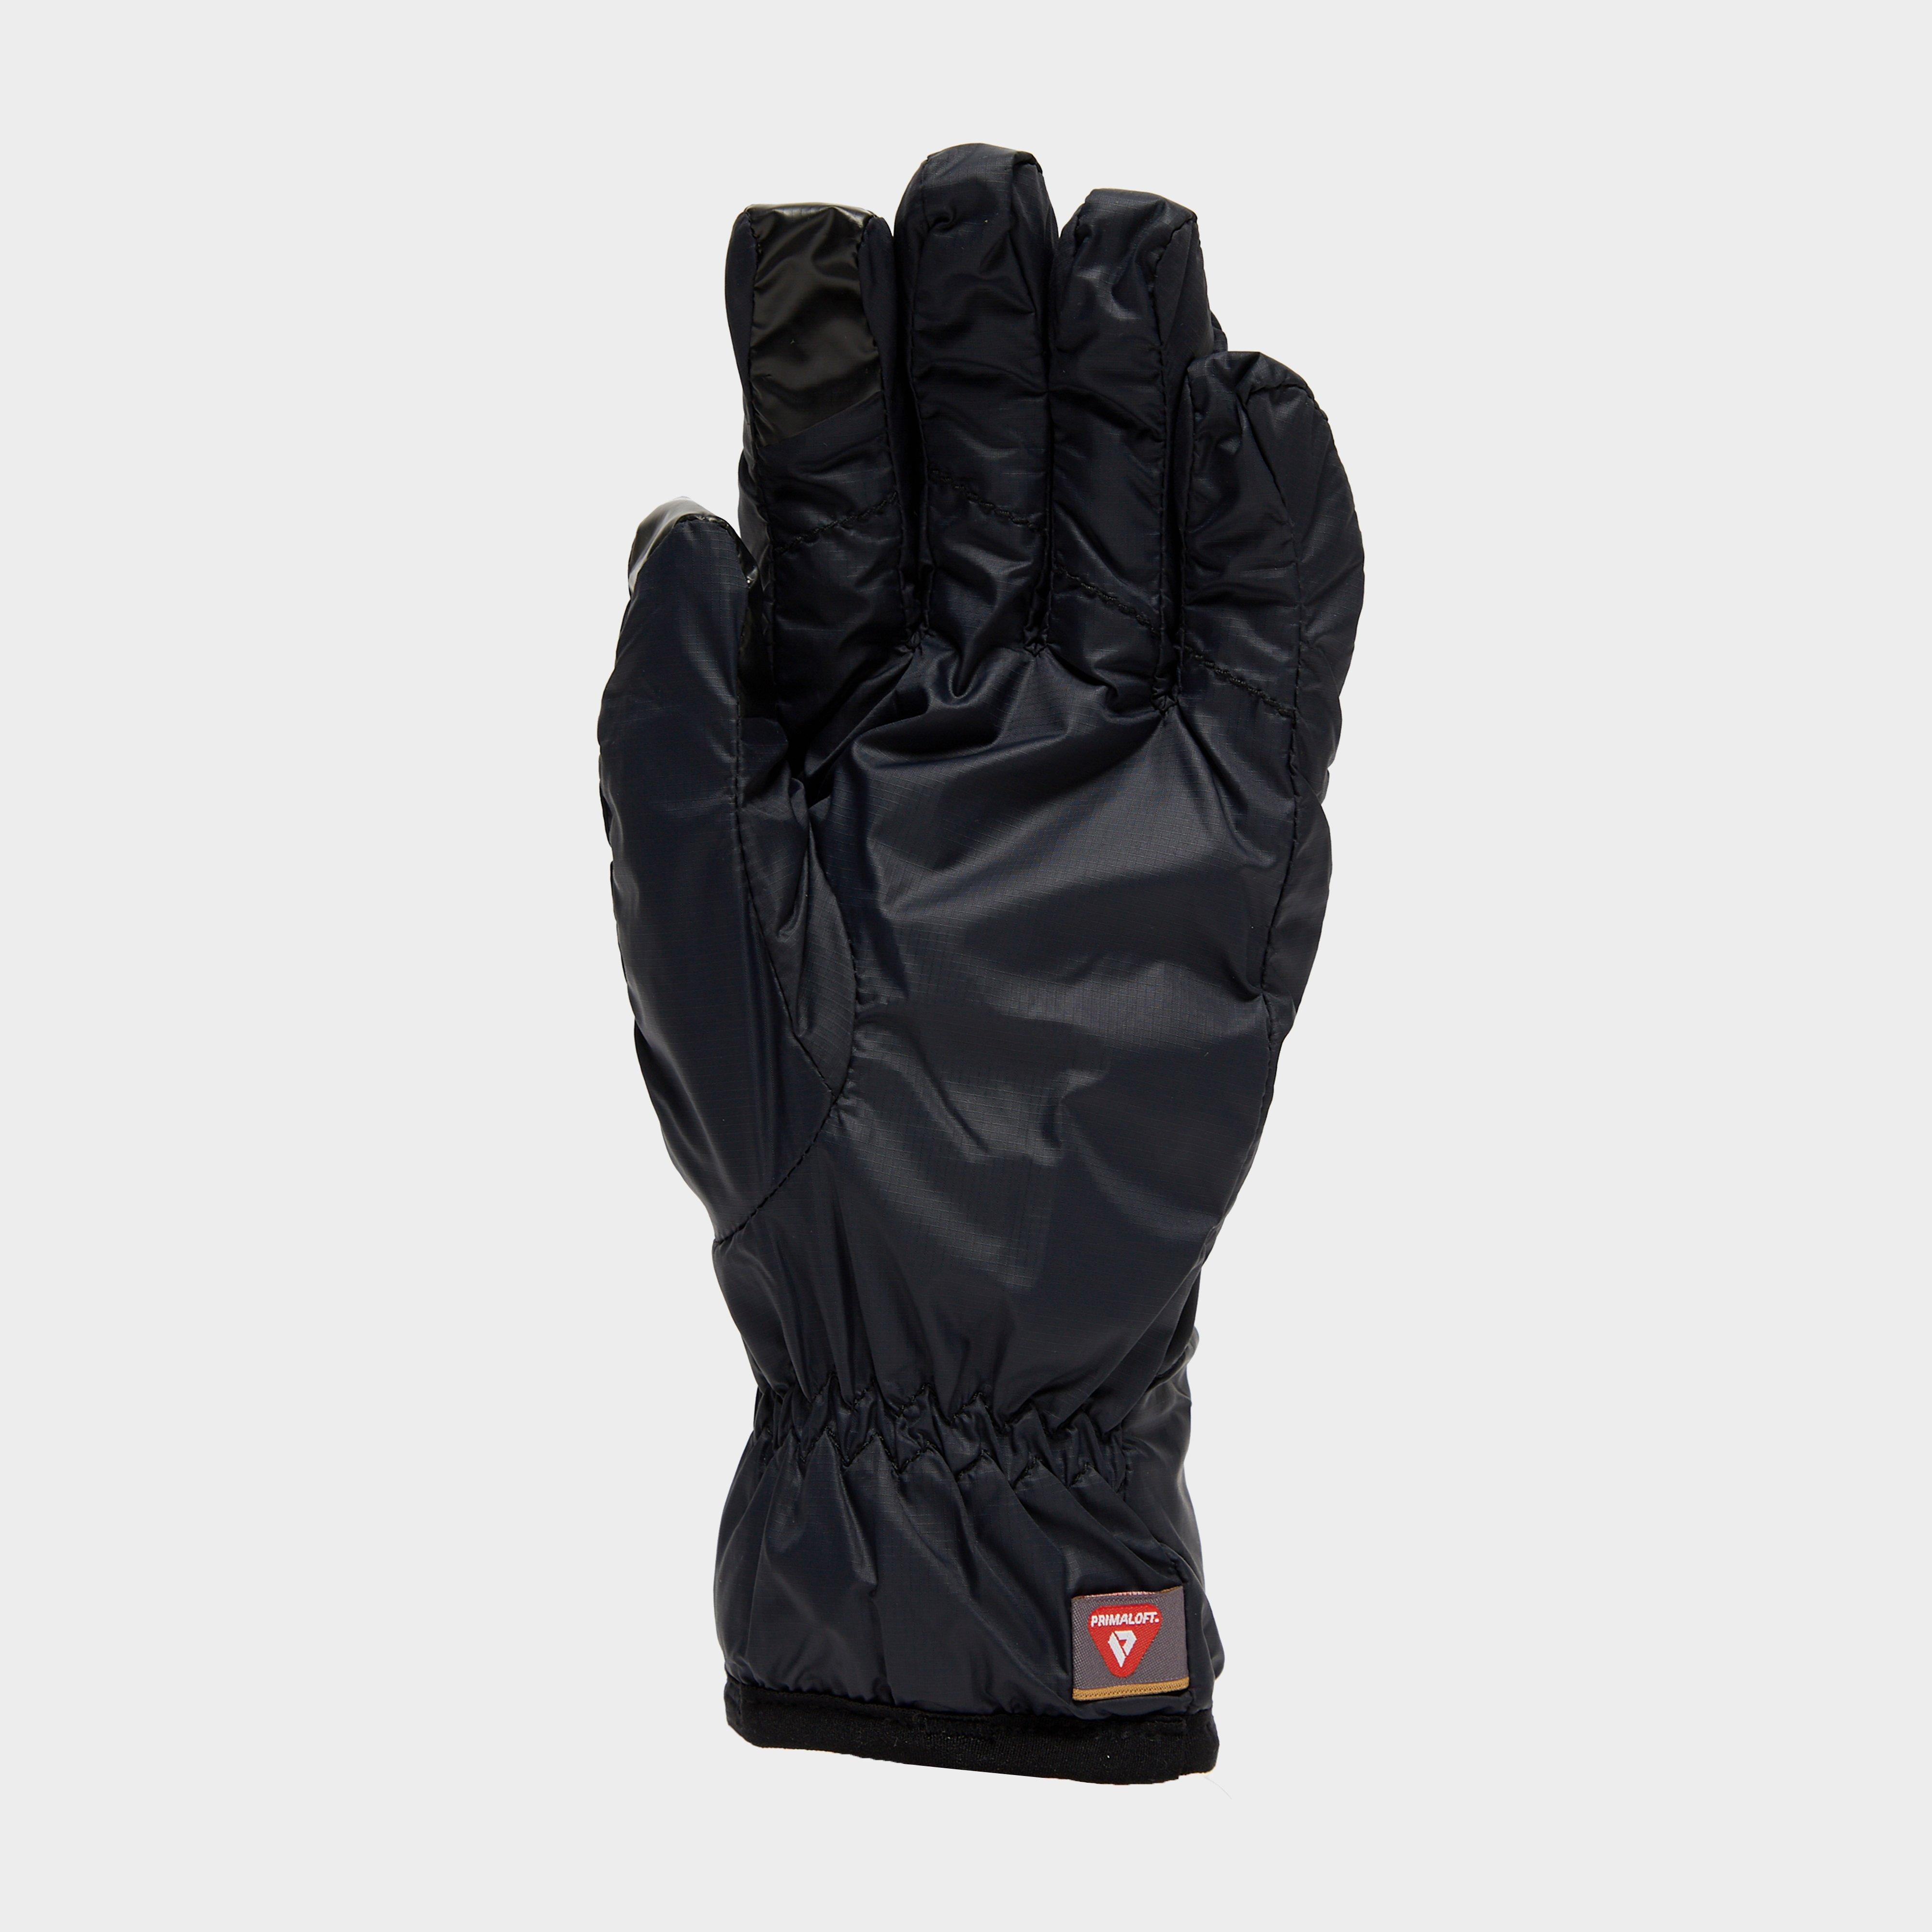 Montane Mens' Prism Gloves Review